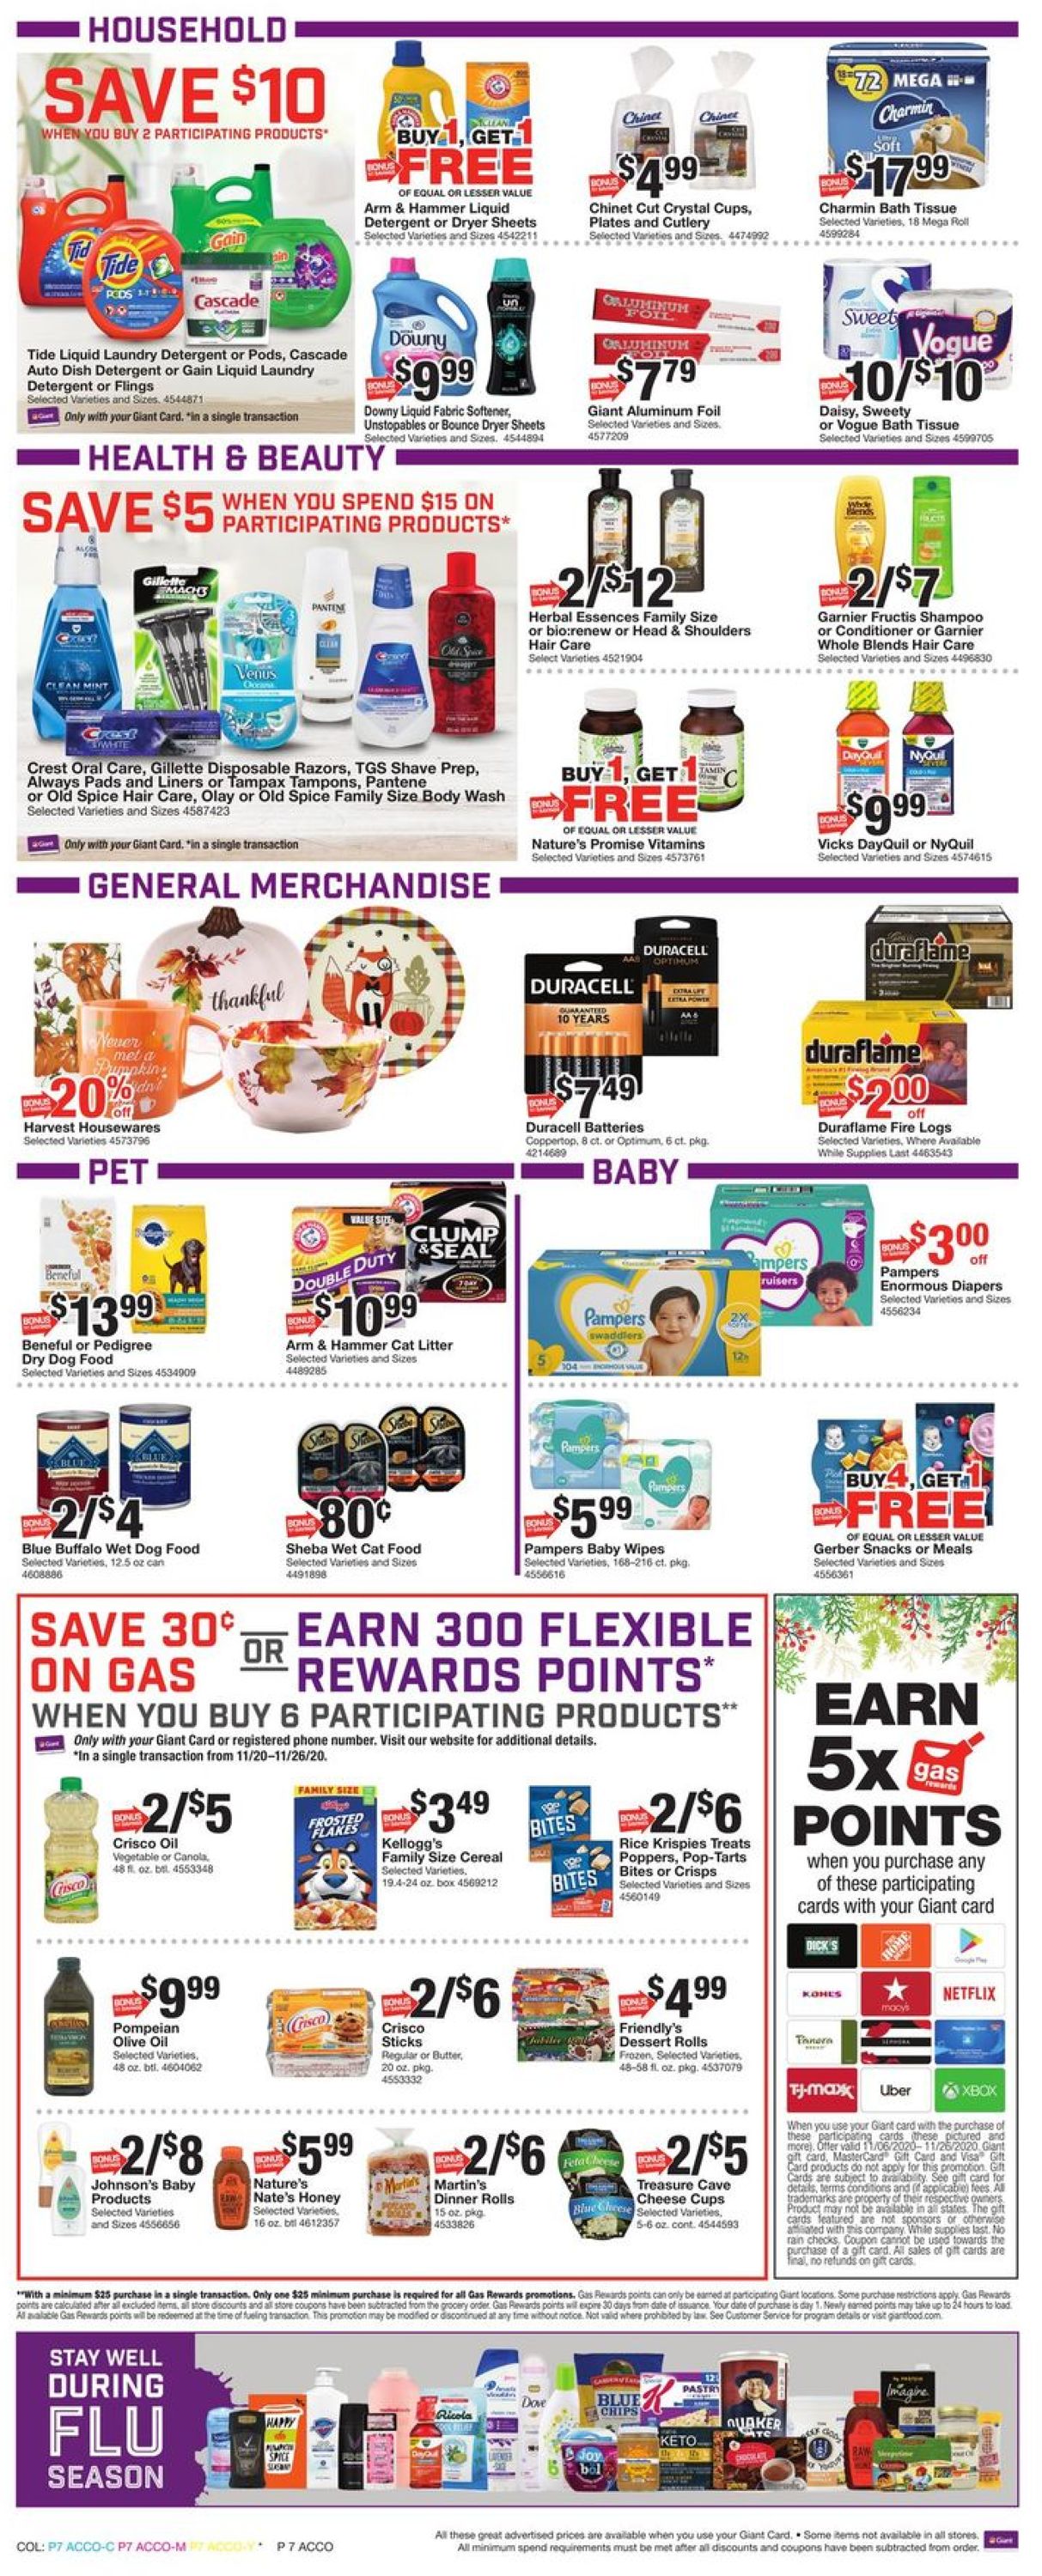 Giant Food Thanksgiving 2020 Weekly Ad Circular - valid 11/20-11/26/2020 (Page 13)